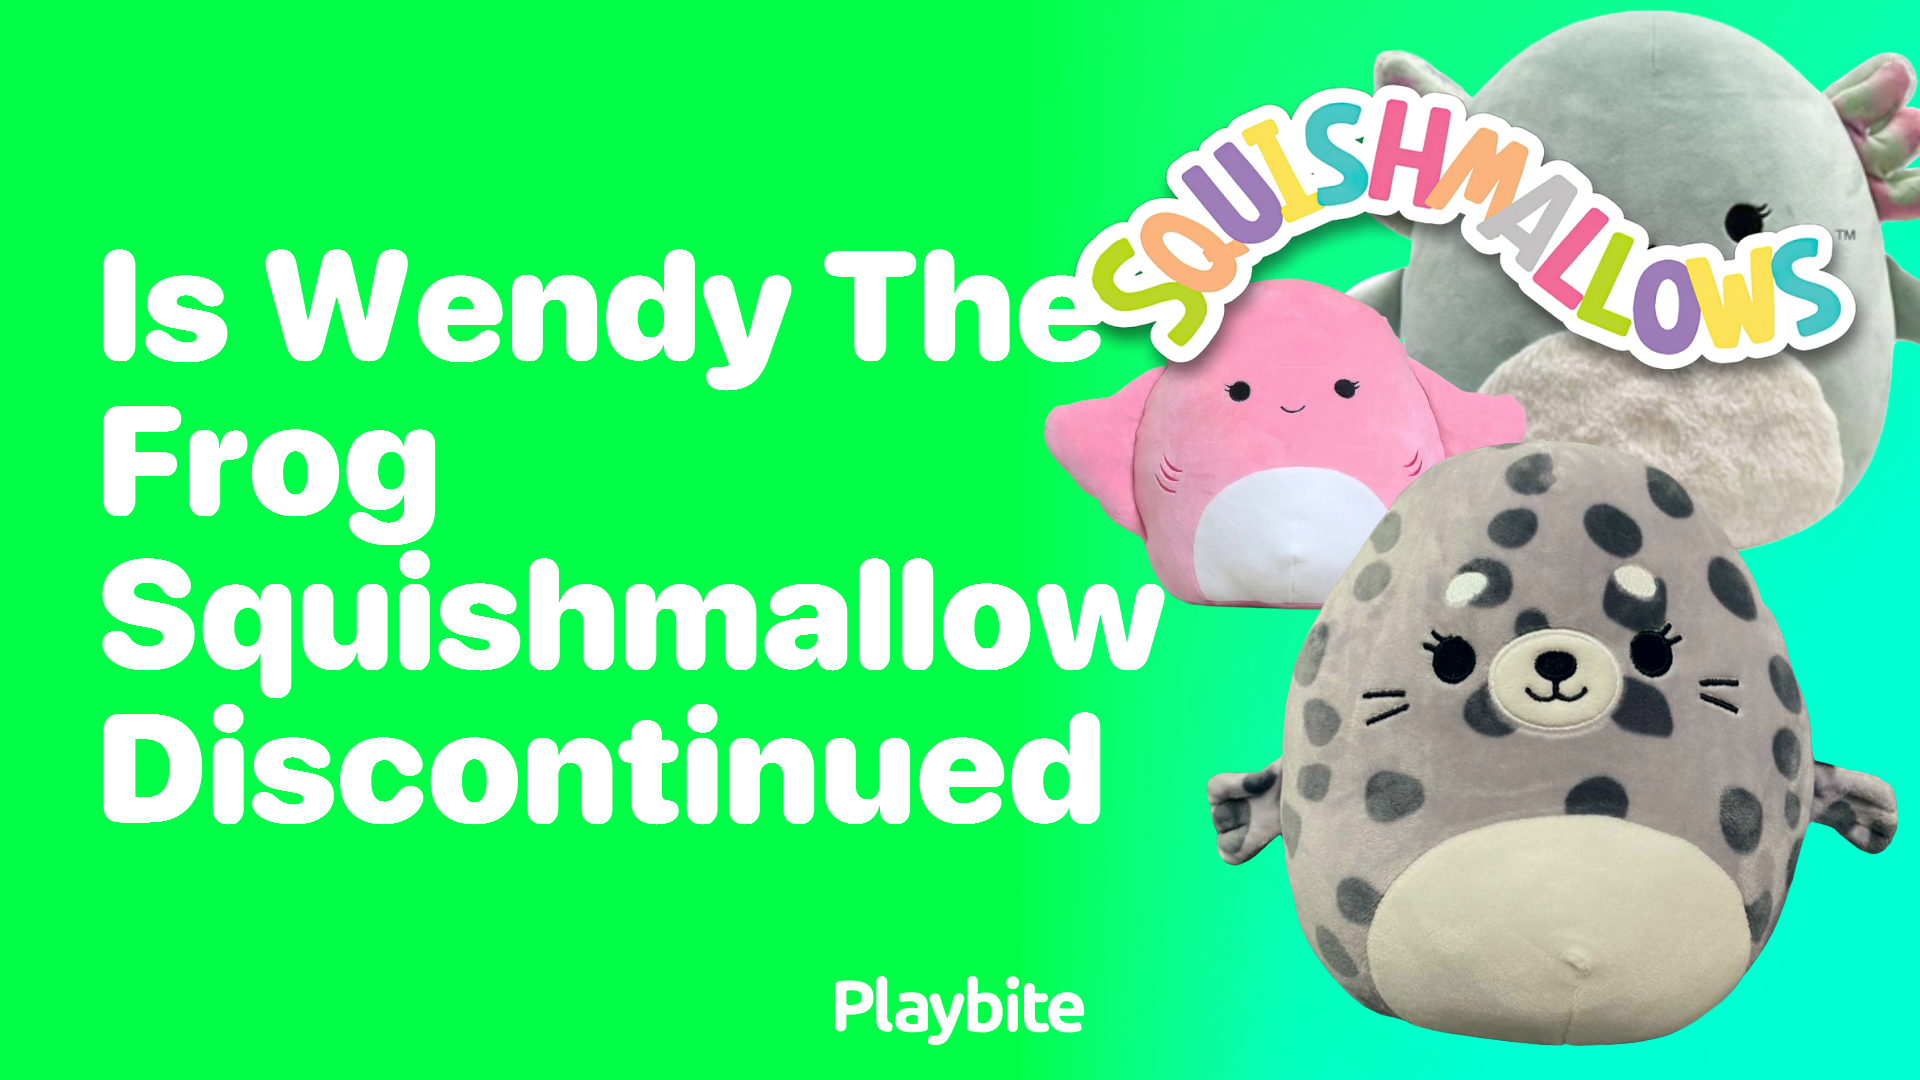 Is Wendy the Frog Squishmallow Discontinued? - Playbite